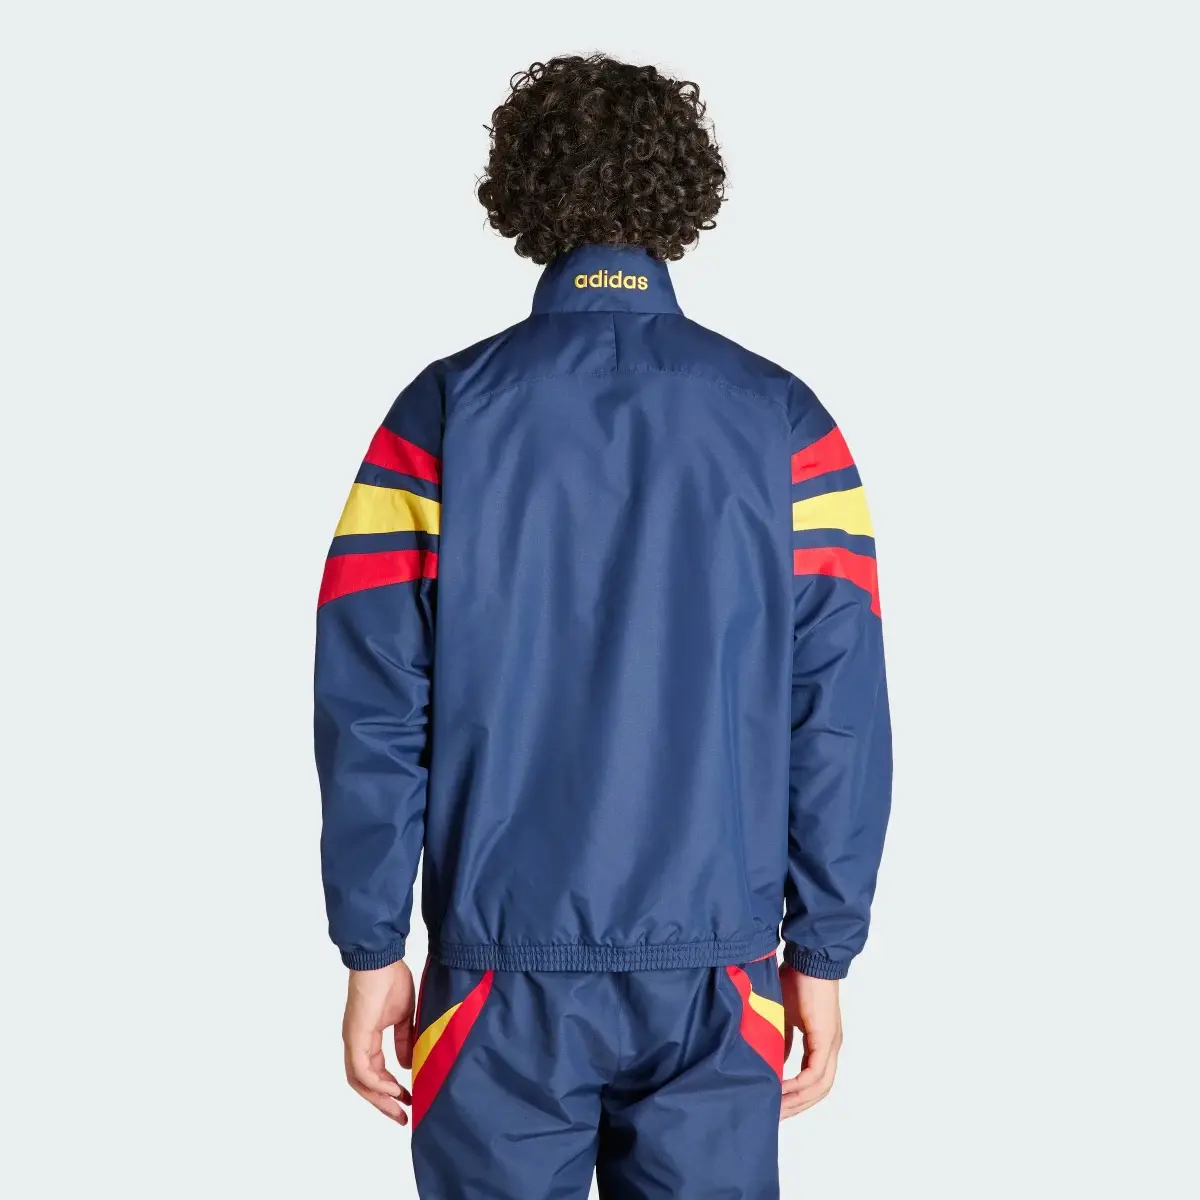 Adidas Spain 1996 Woven Track Top. 3